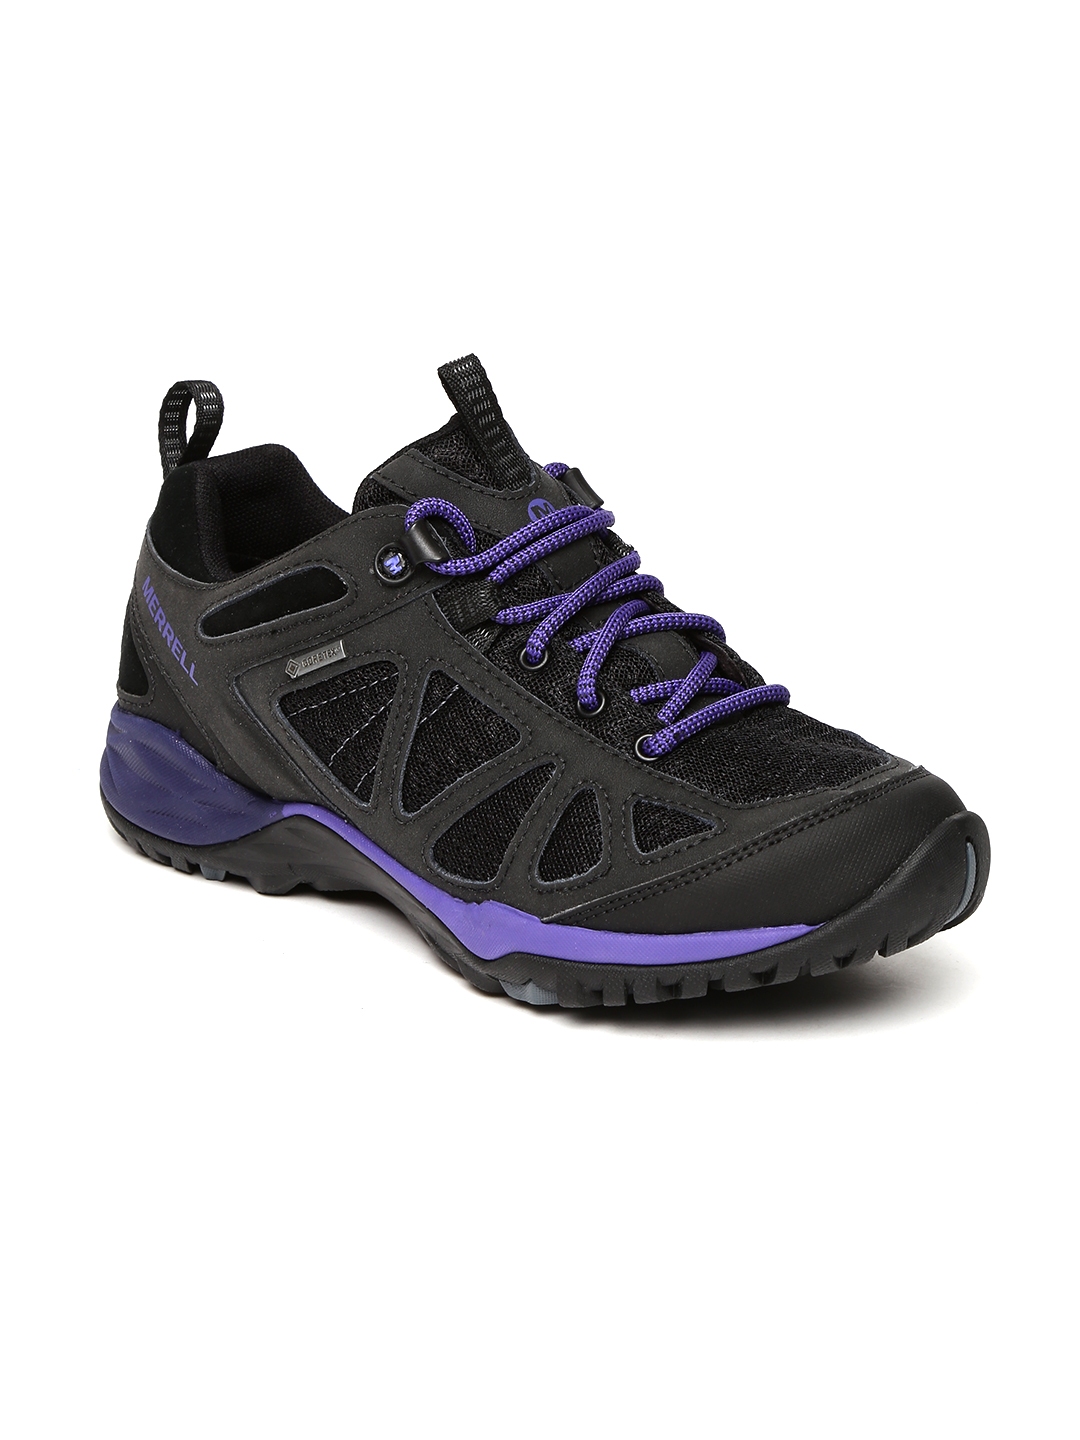 merrell womens black leather shoes